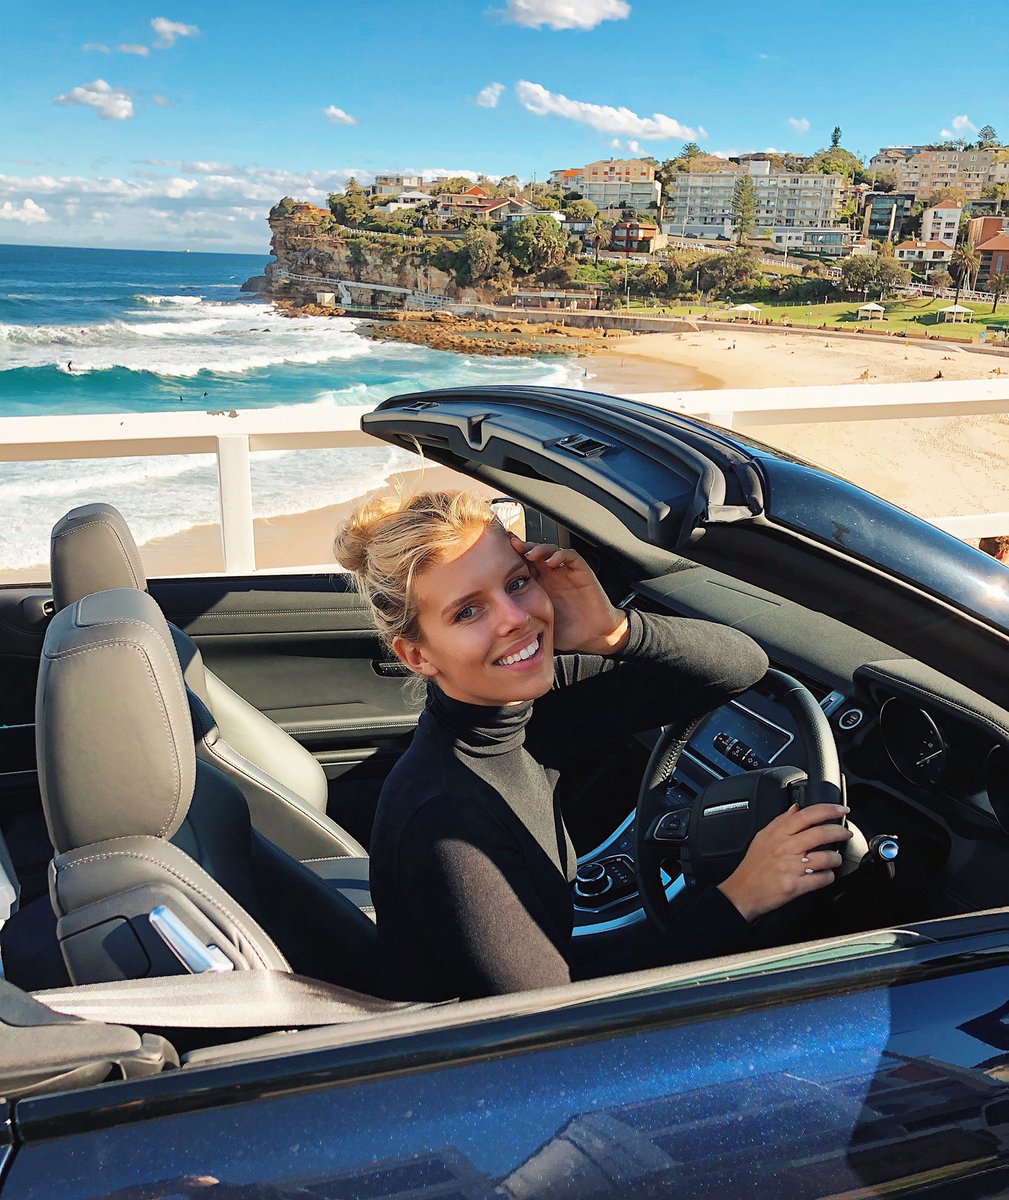 Always have to do “the drive of the beaches” when I get home to Sydney ????✨???????? Roof down in the @landroveraus ???????? https://t.co/stSYKpYC20